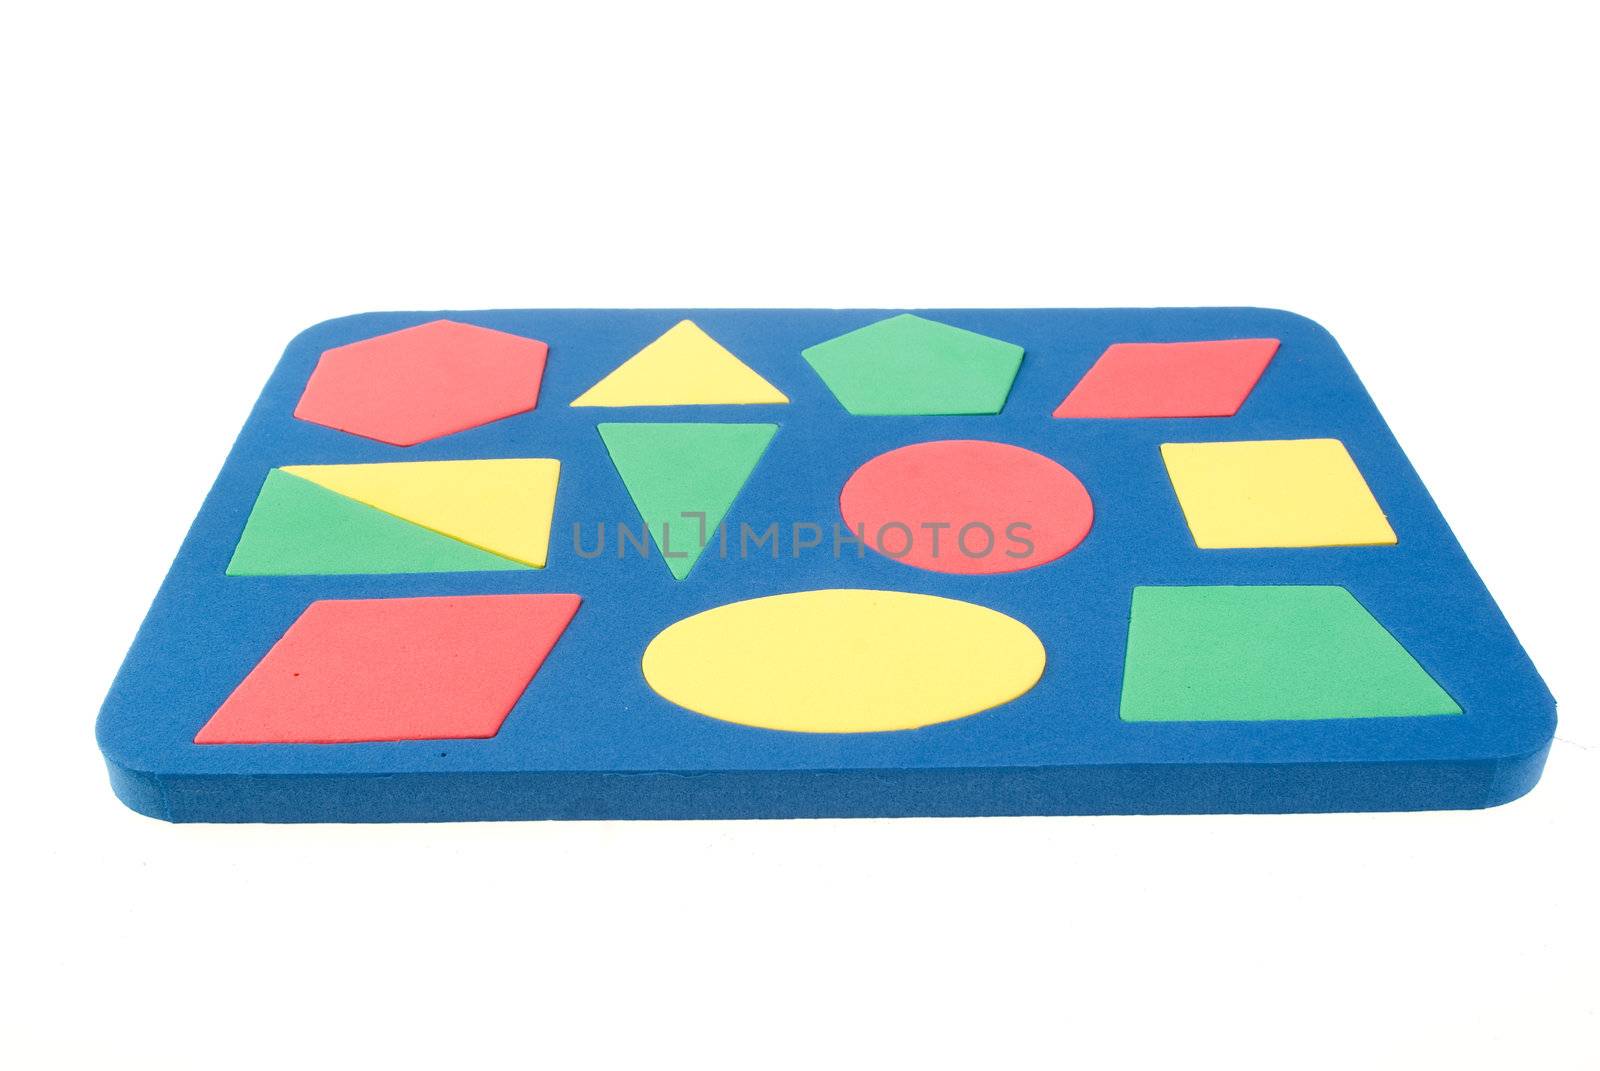 Children's developing game with geometric shapes by BIG_TAU